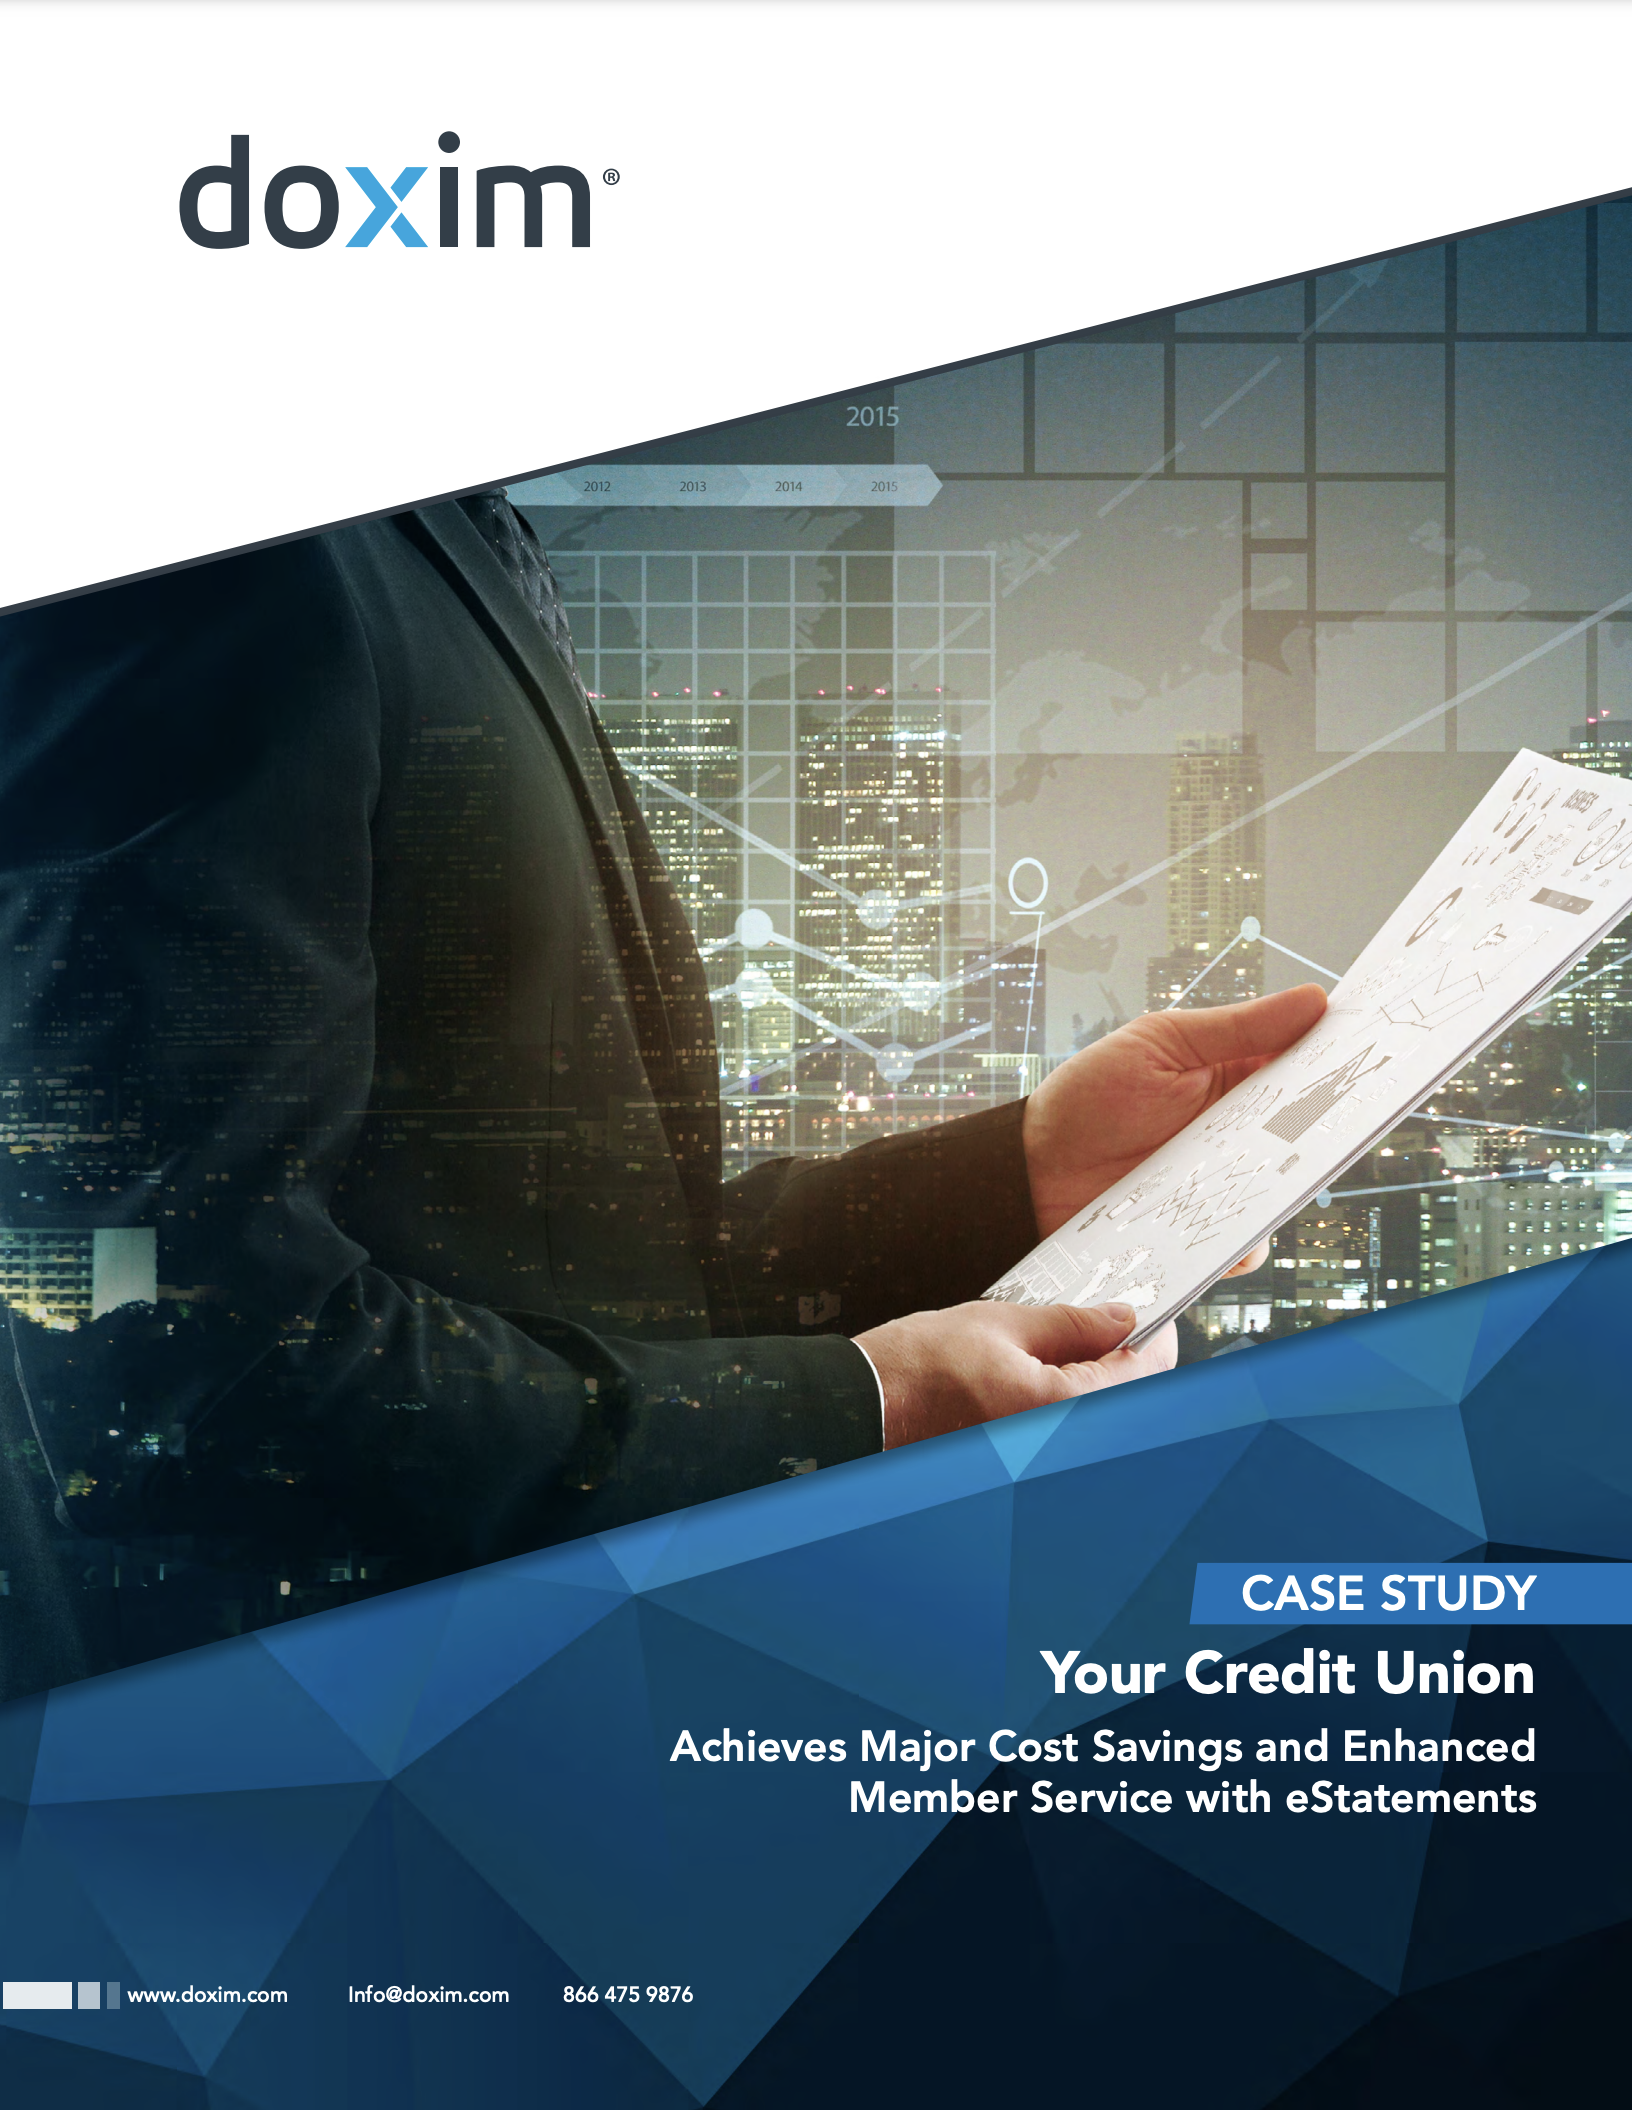 Case Study: Your Credit Union Achieves Major Cost Savings and Enhanced Member Service with eStatements